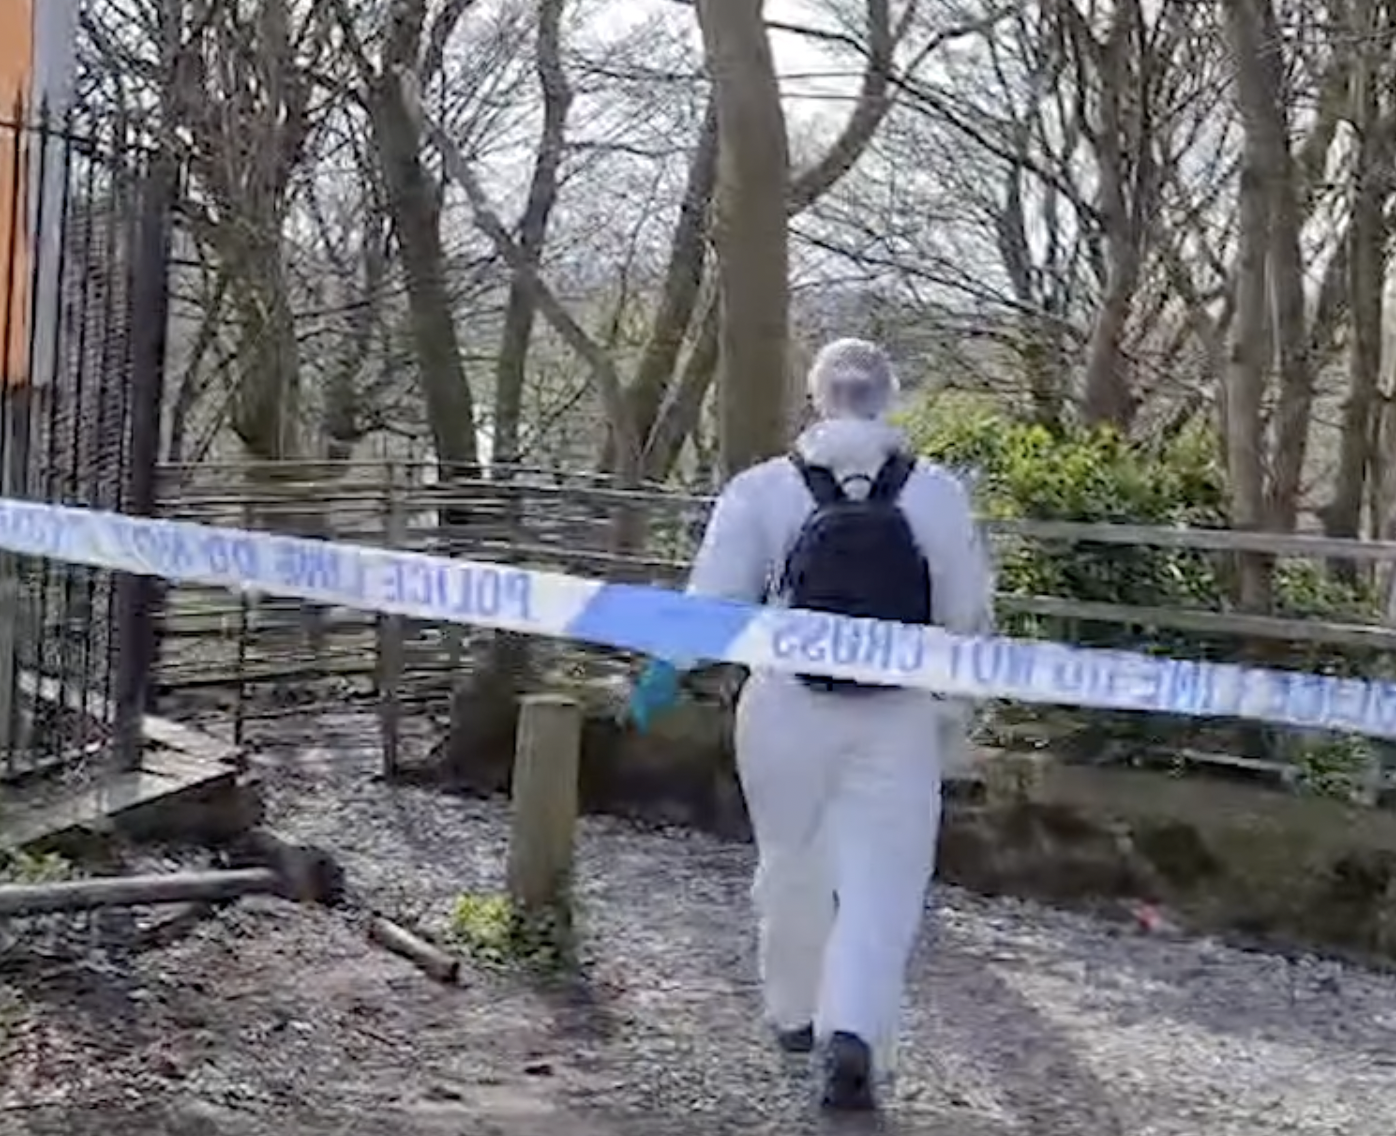 The scene at Kersal Wetlands after human remains were found. Credit: GMP